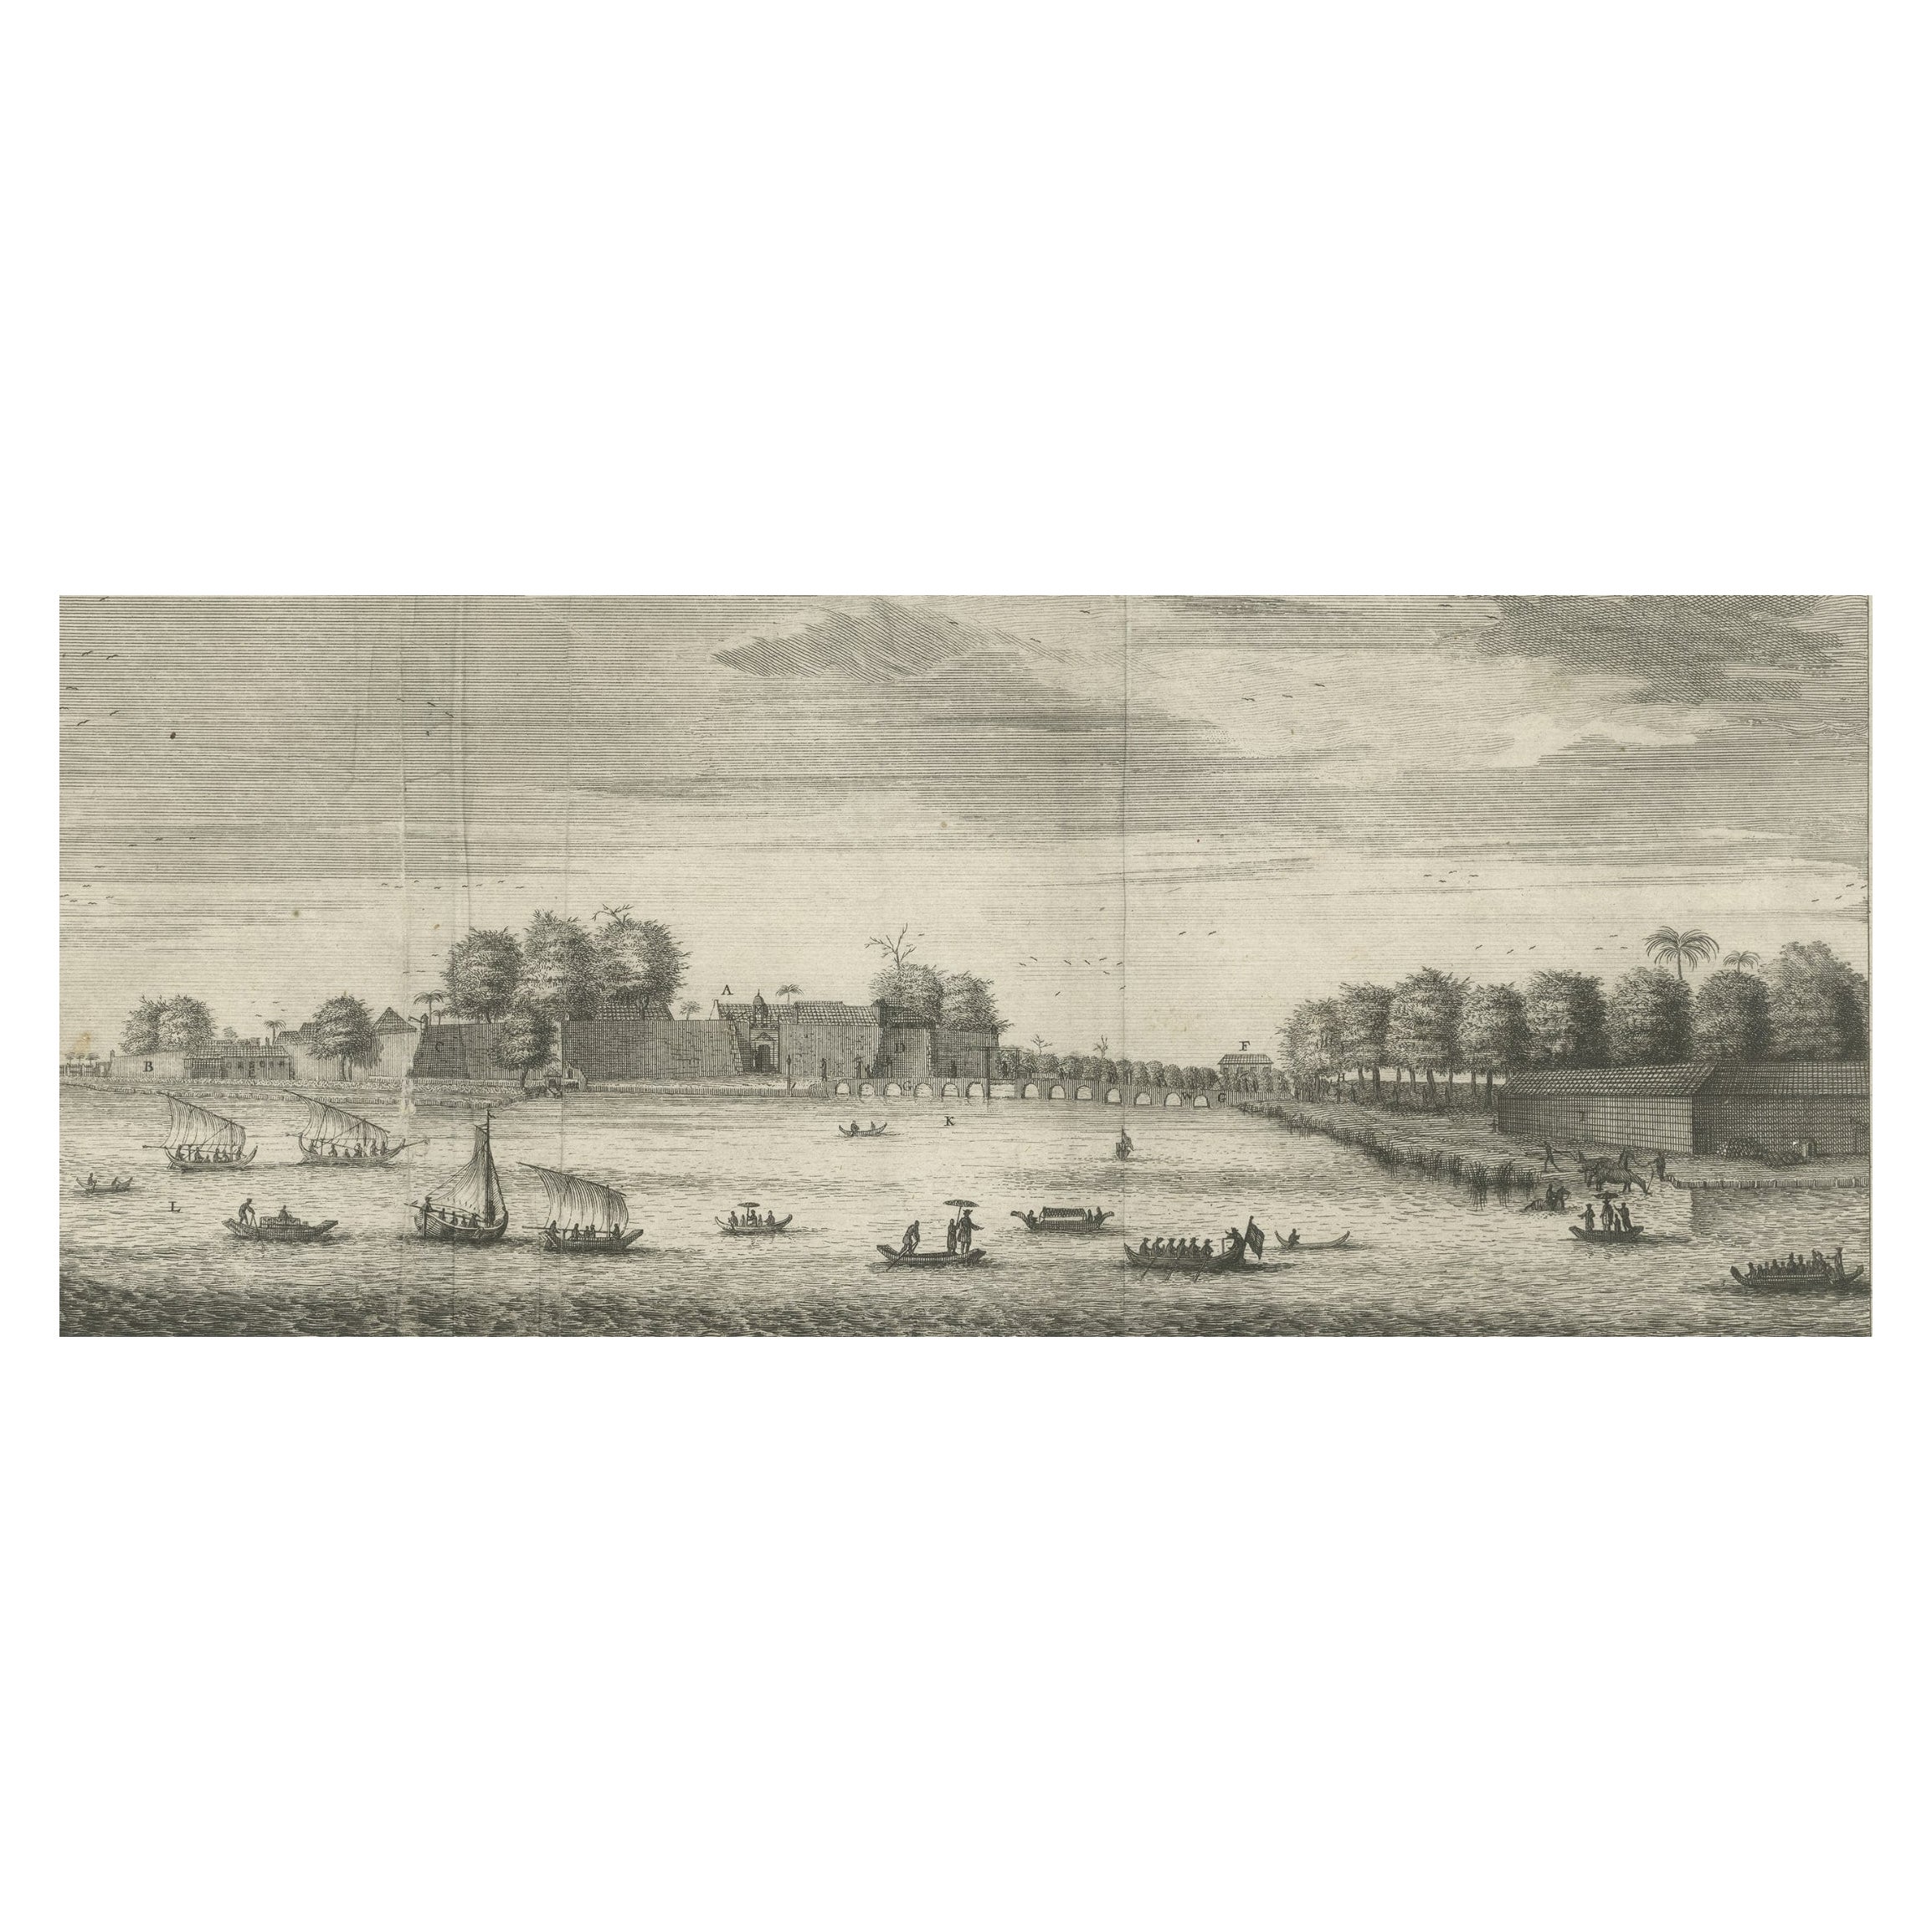 The Castle of Batavia (Jakarta) in the Dutch East Indies (Indonesia), 1726